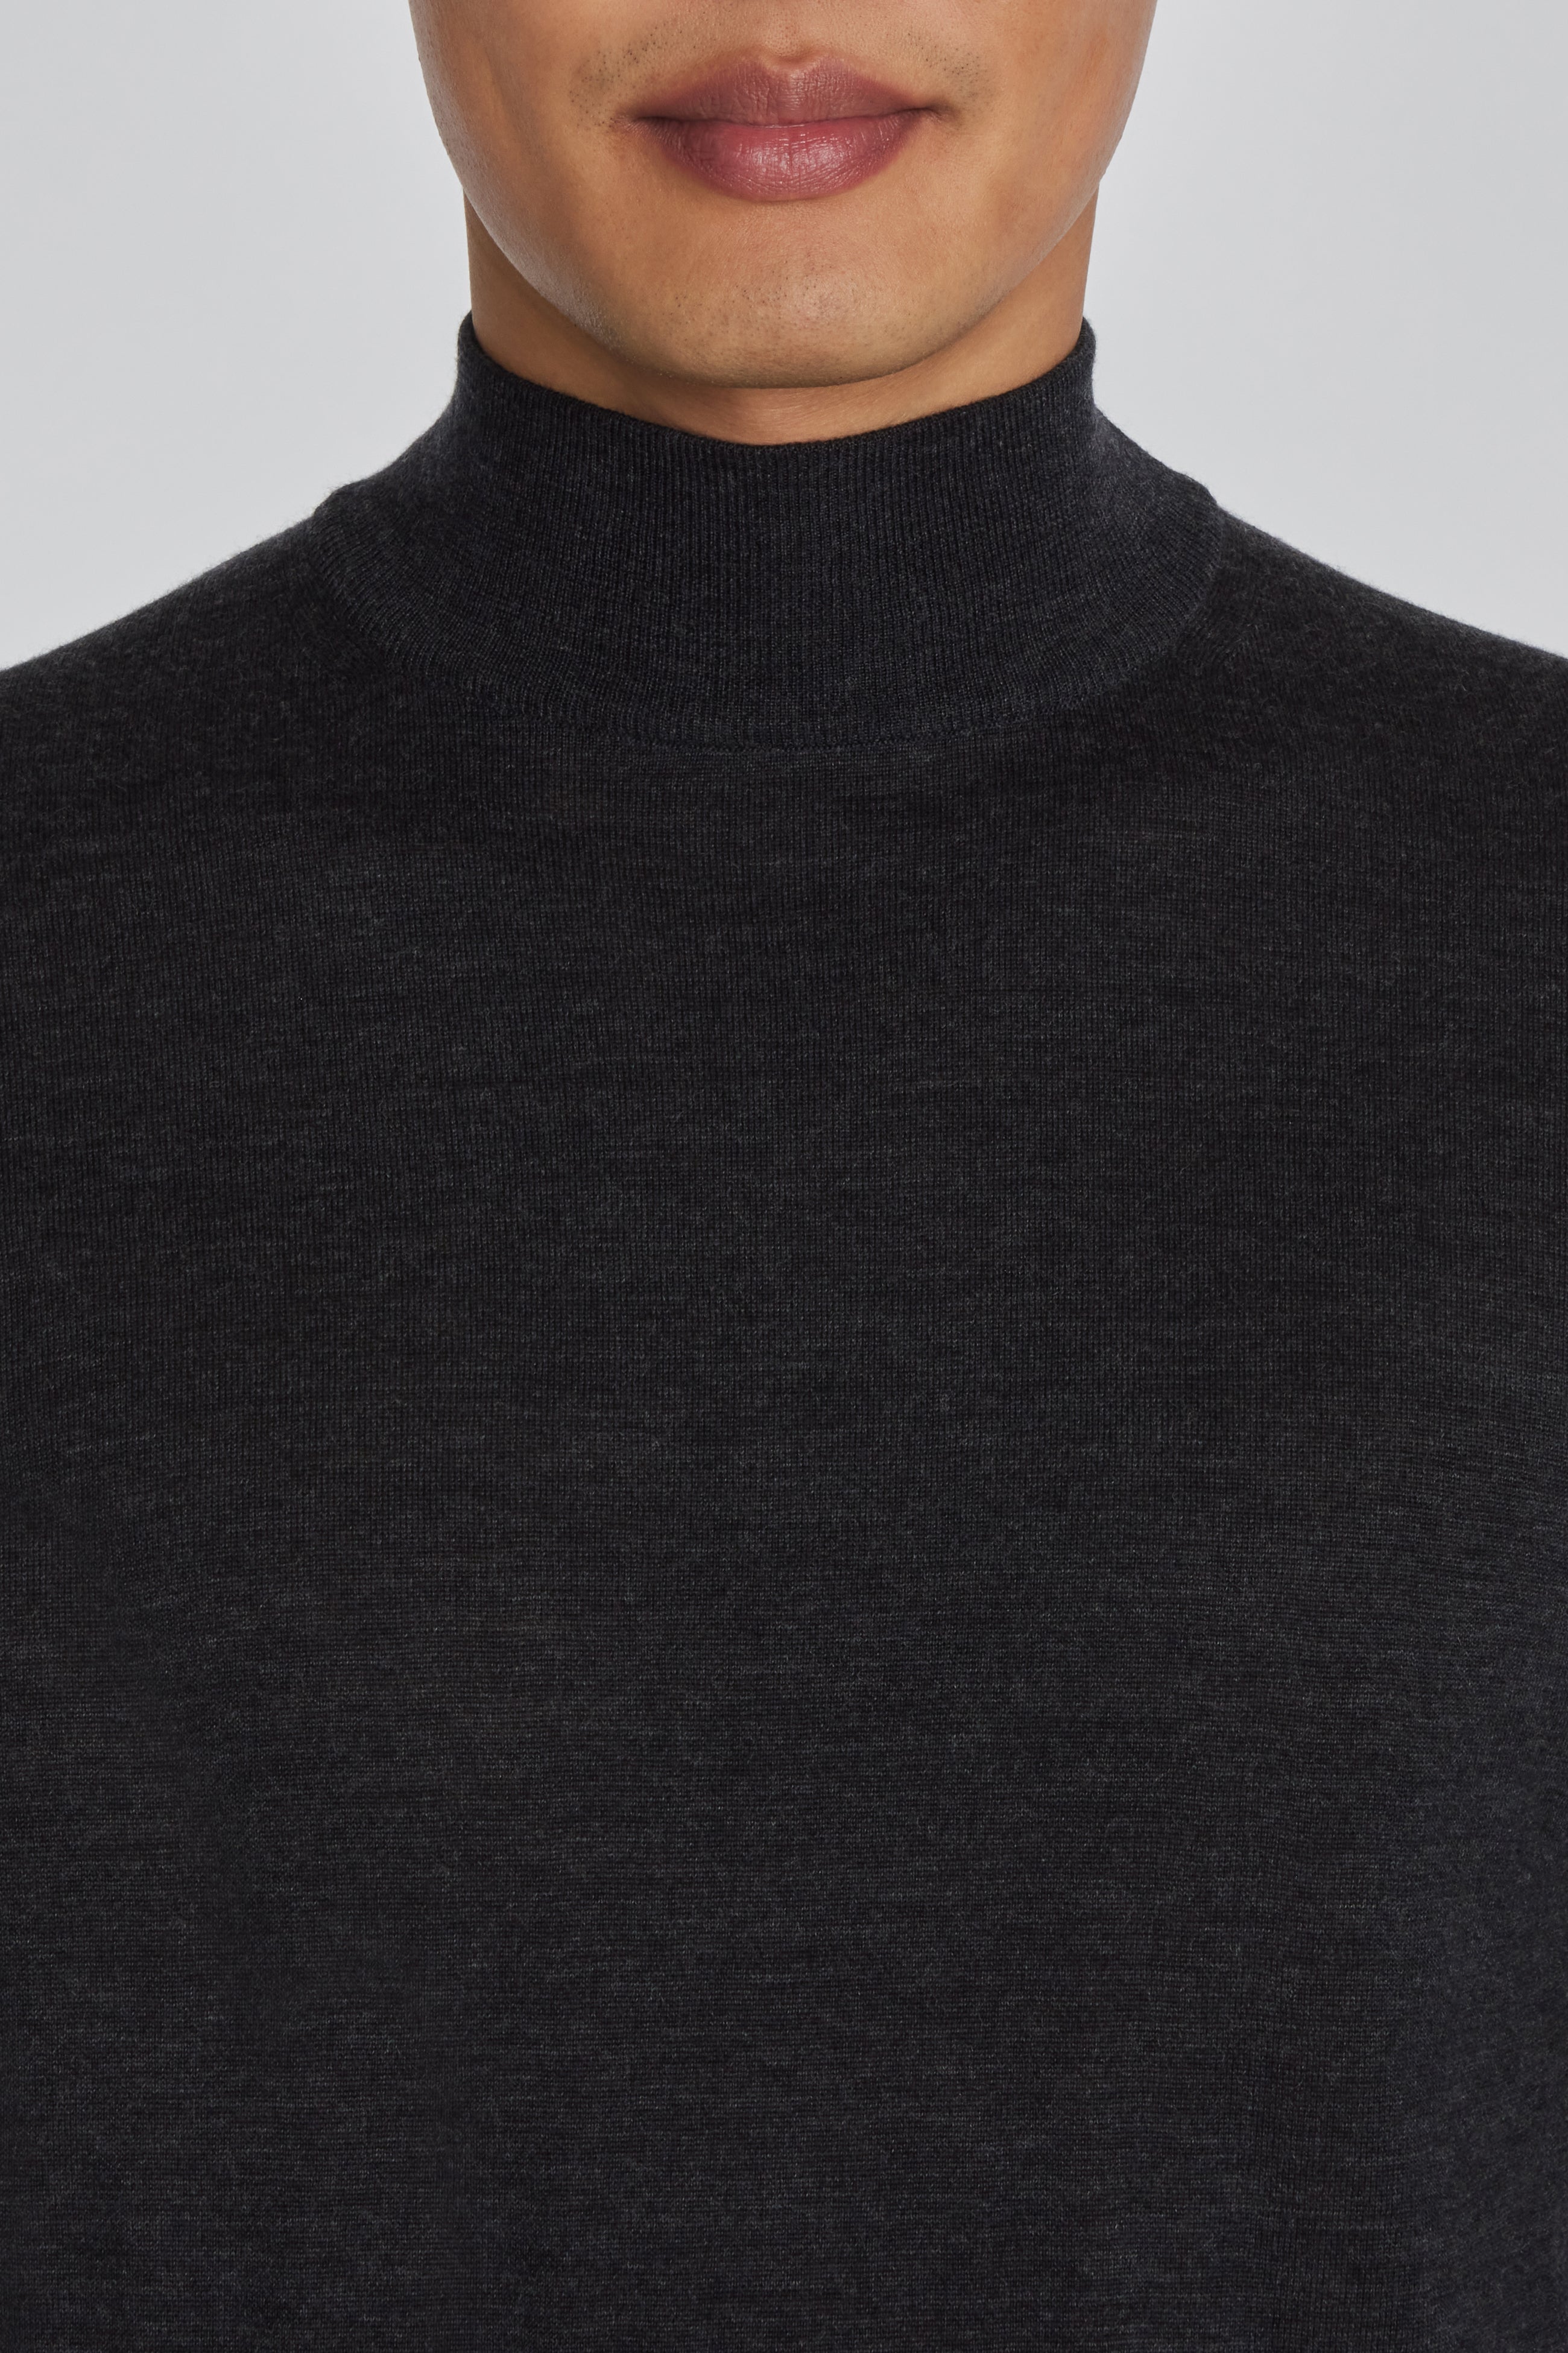 Alt view 1 Beaudry Wool, Silk and Cashmere Mock Neck Sweater in Charcoal